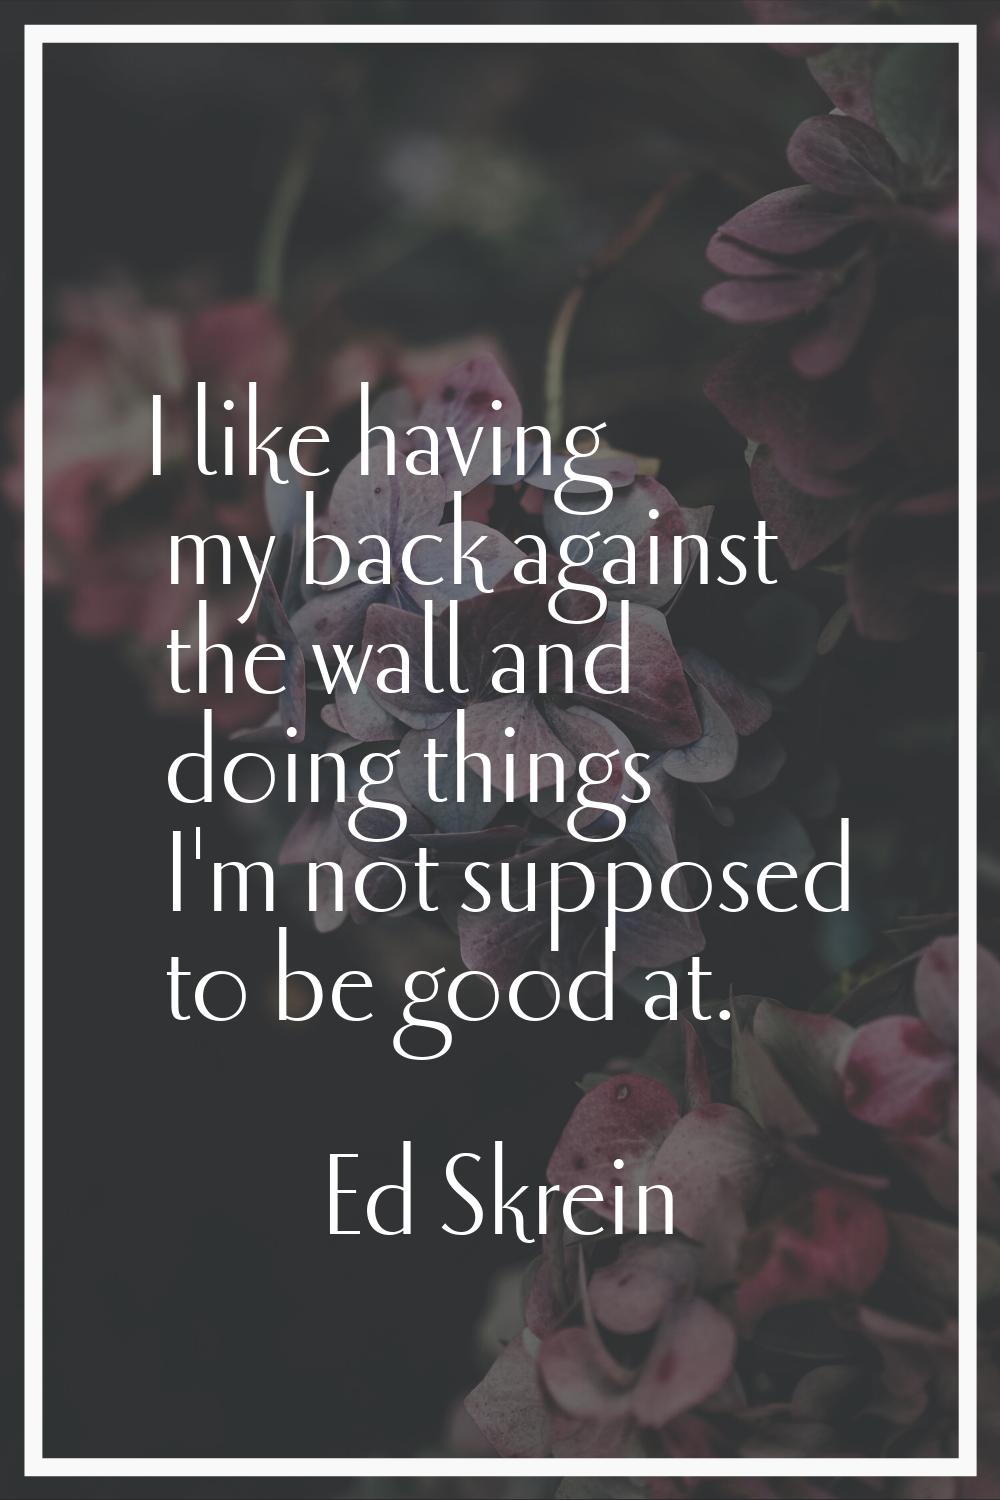 I like having my back against the wall and doing things I'm not supposed to be good at.